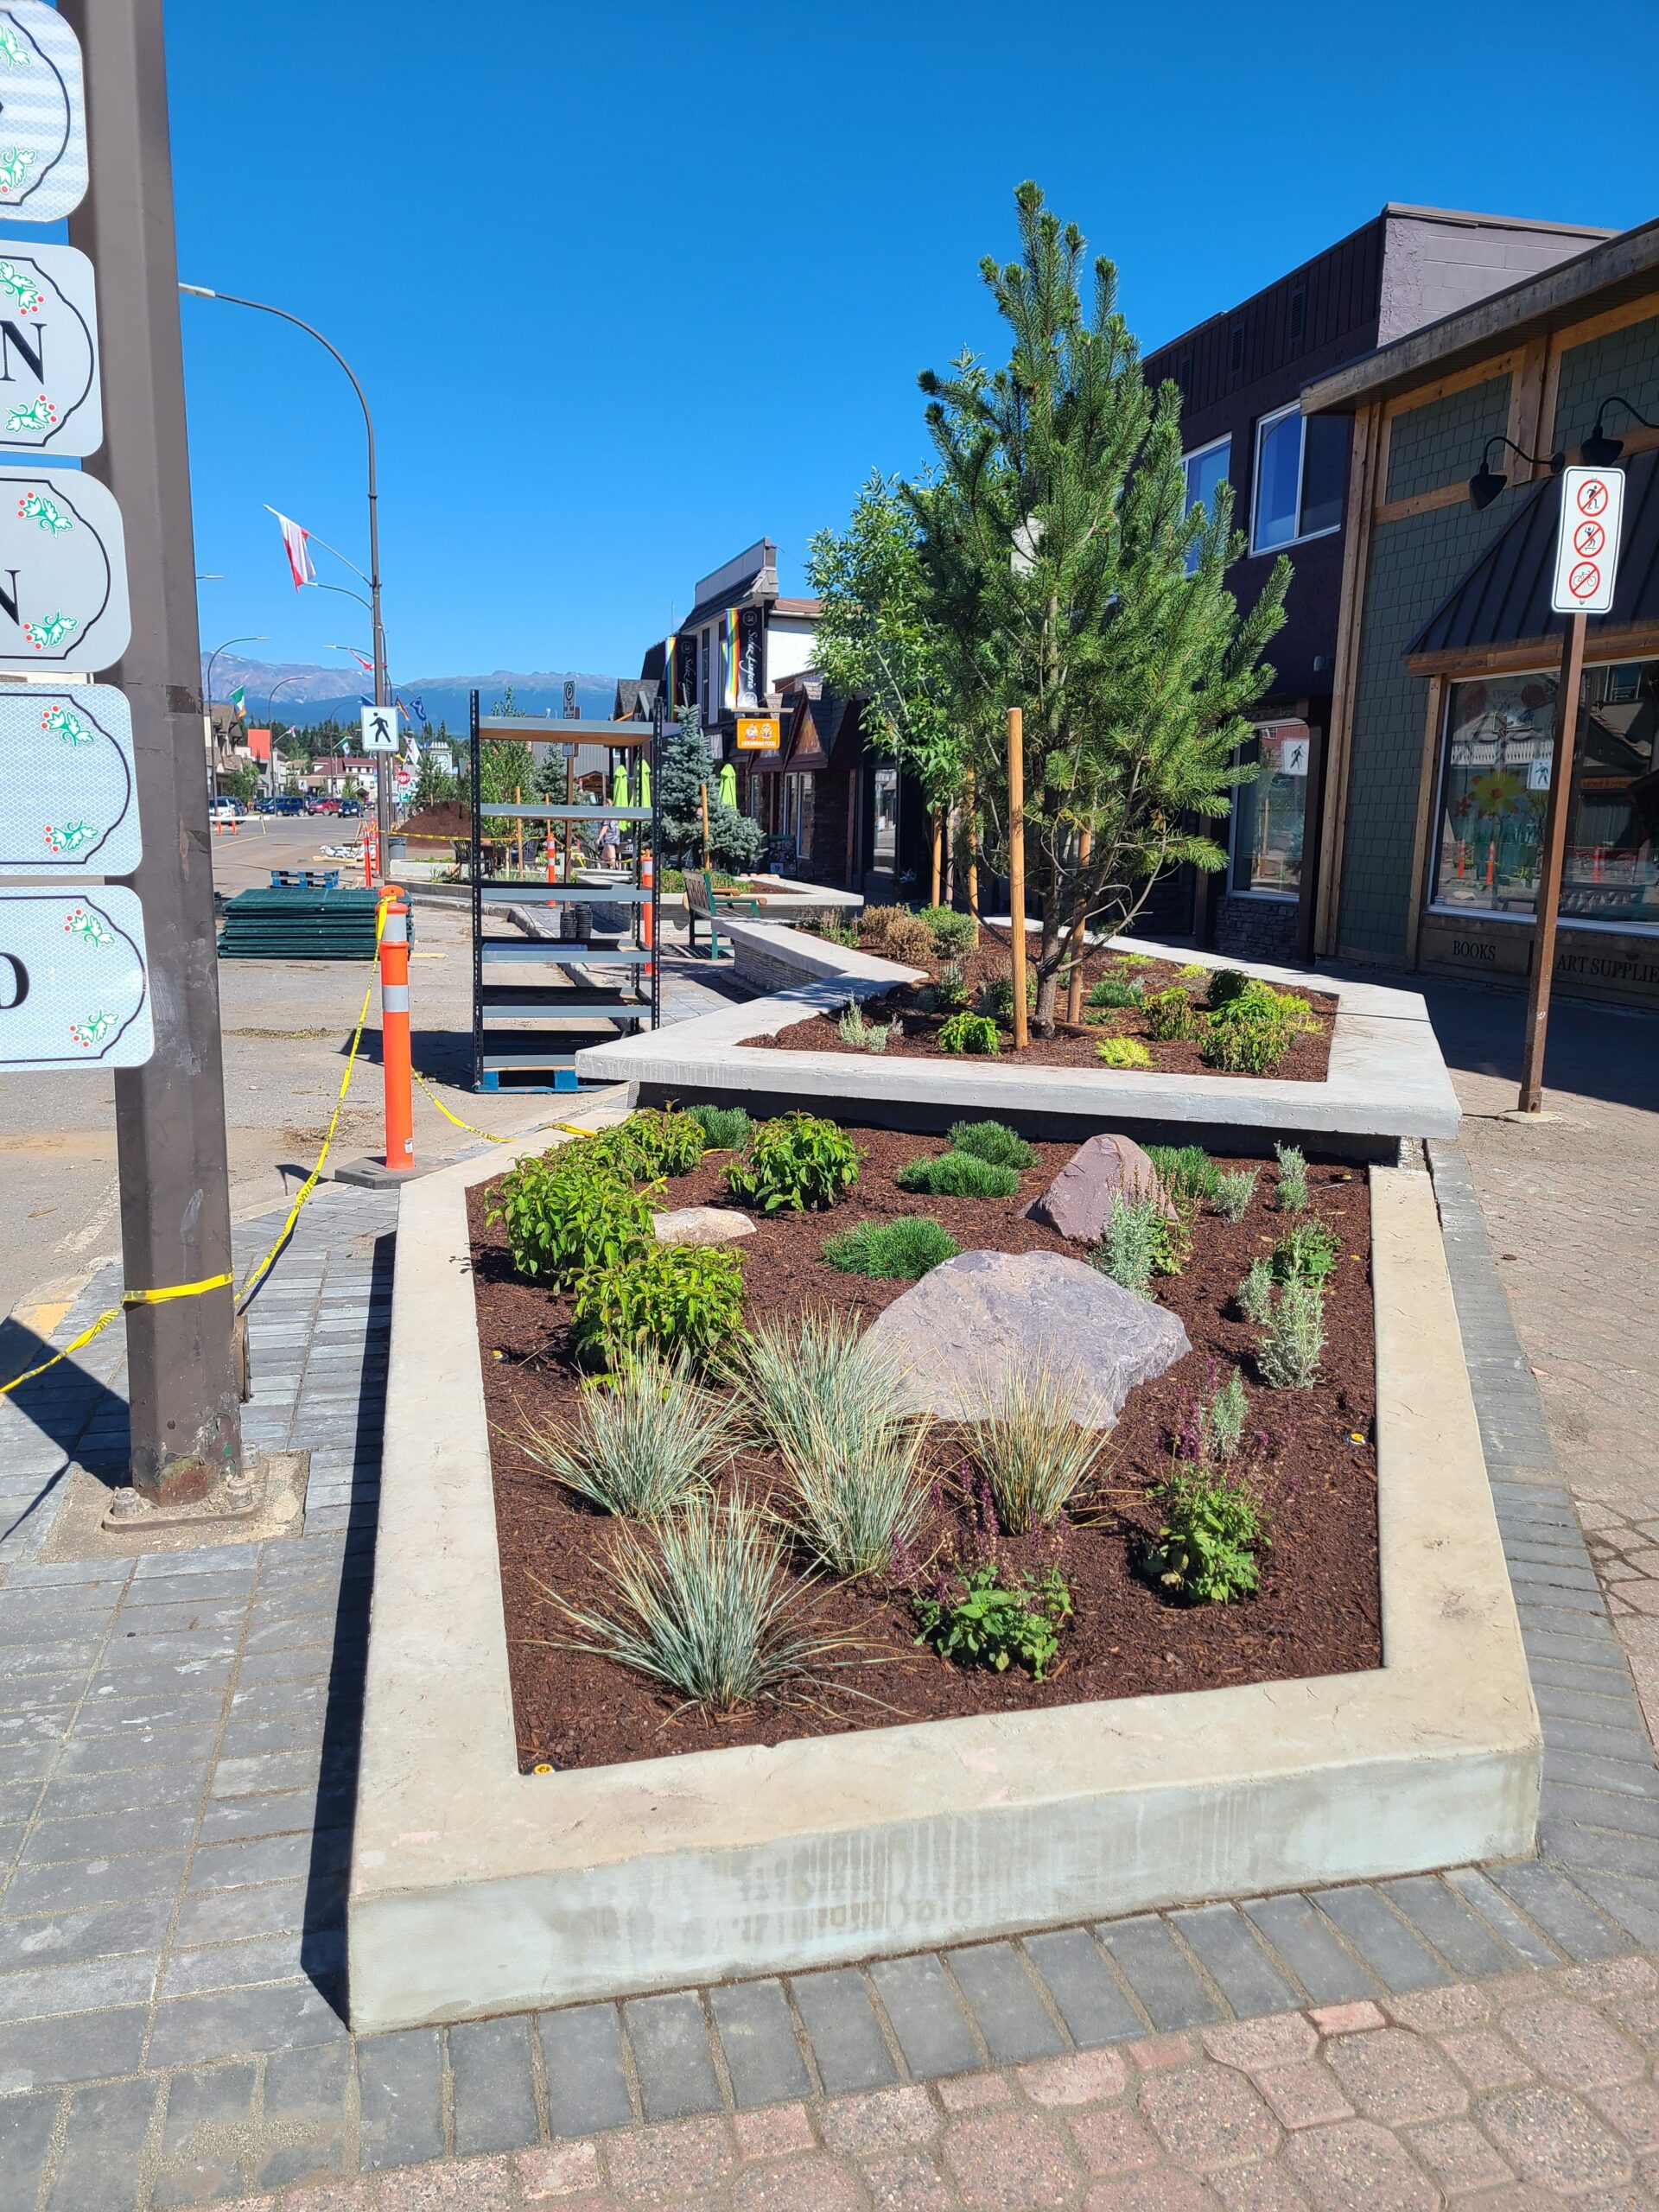 Town of Smithers to celebrate the Main Street Revitalization and Landscaping project